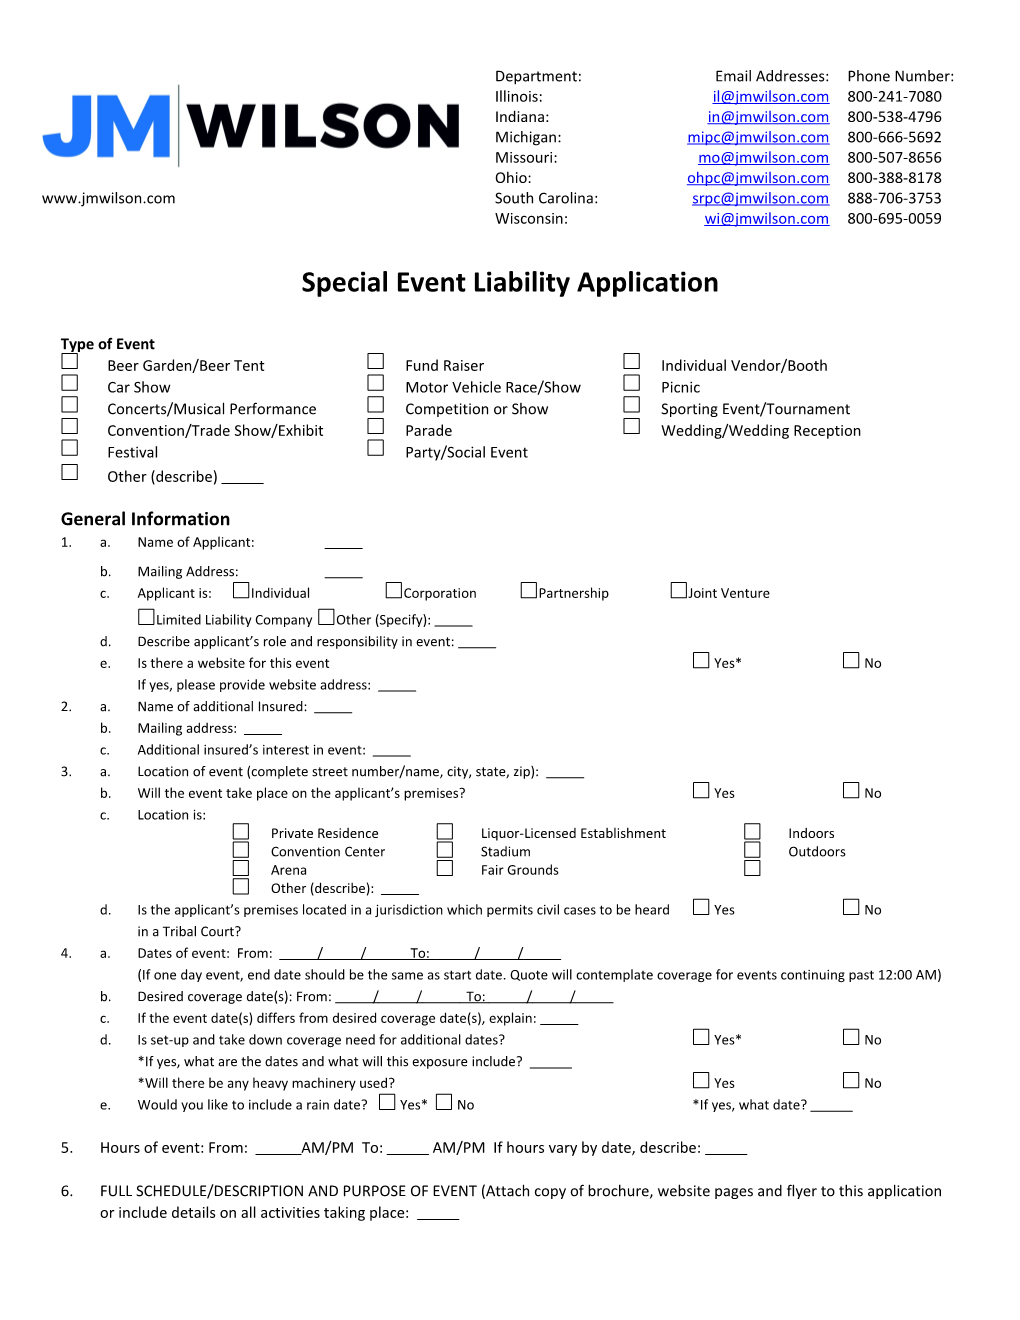 Special Event General Liability Application